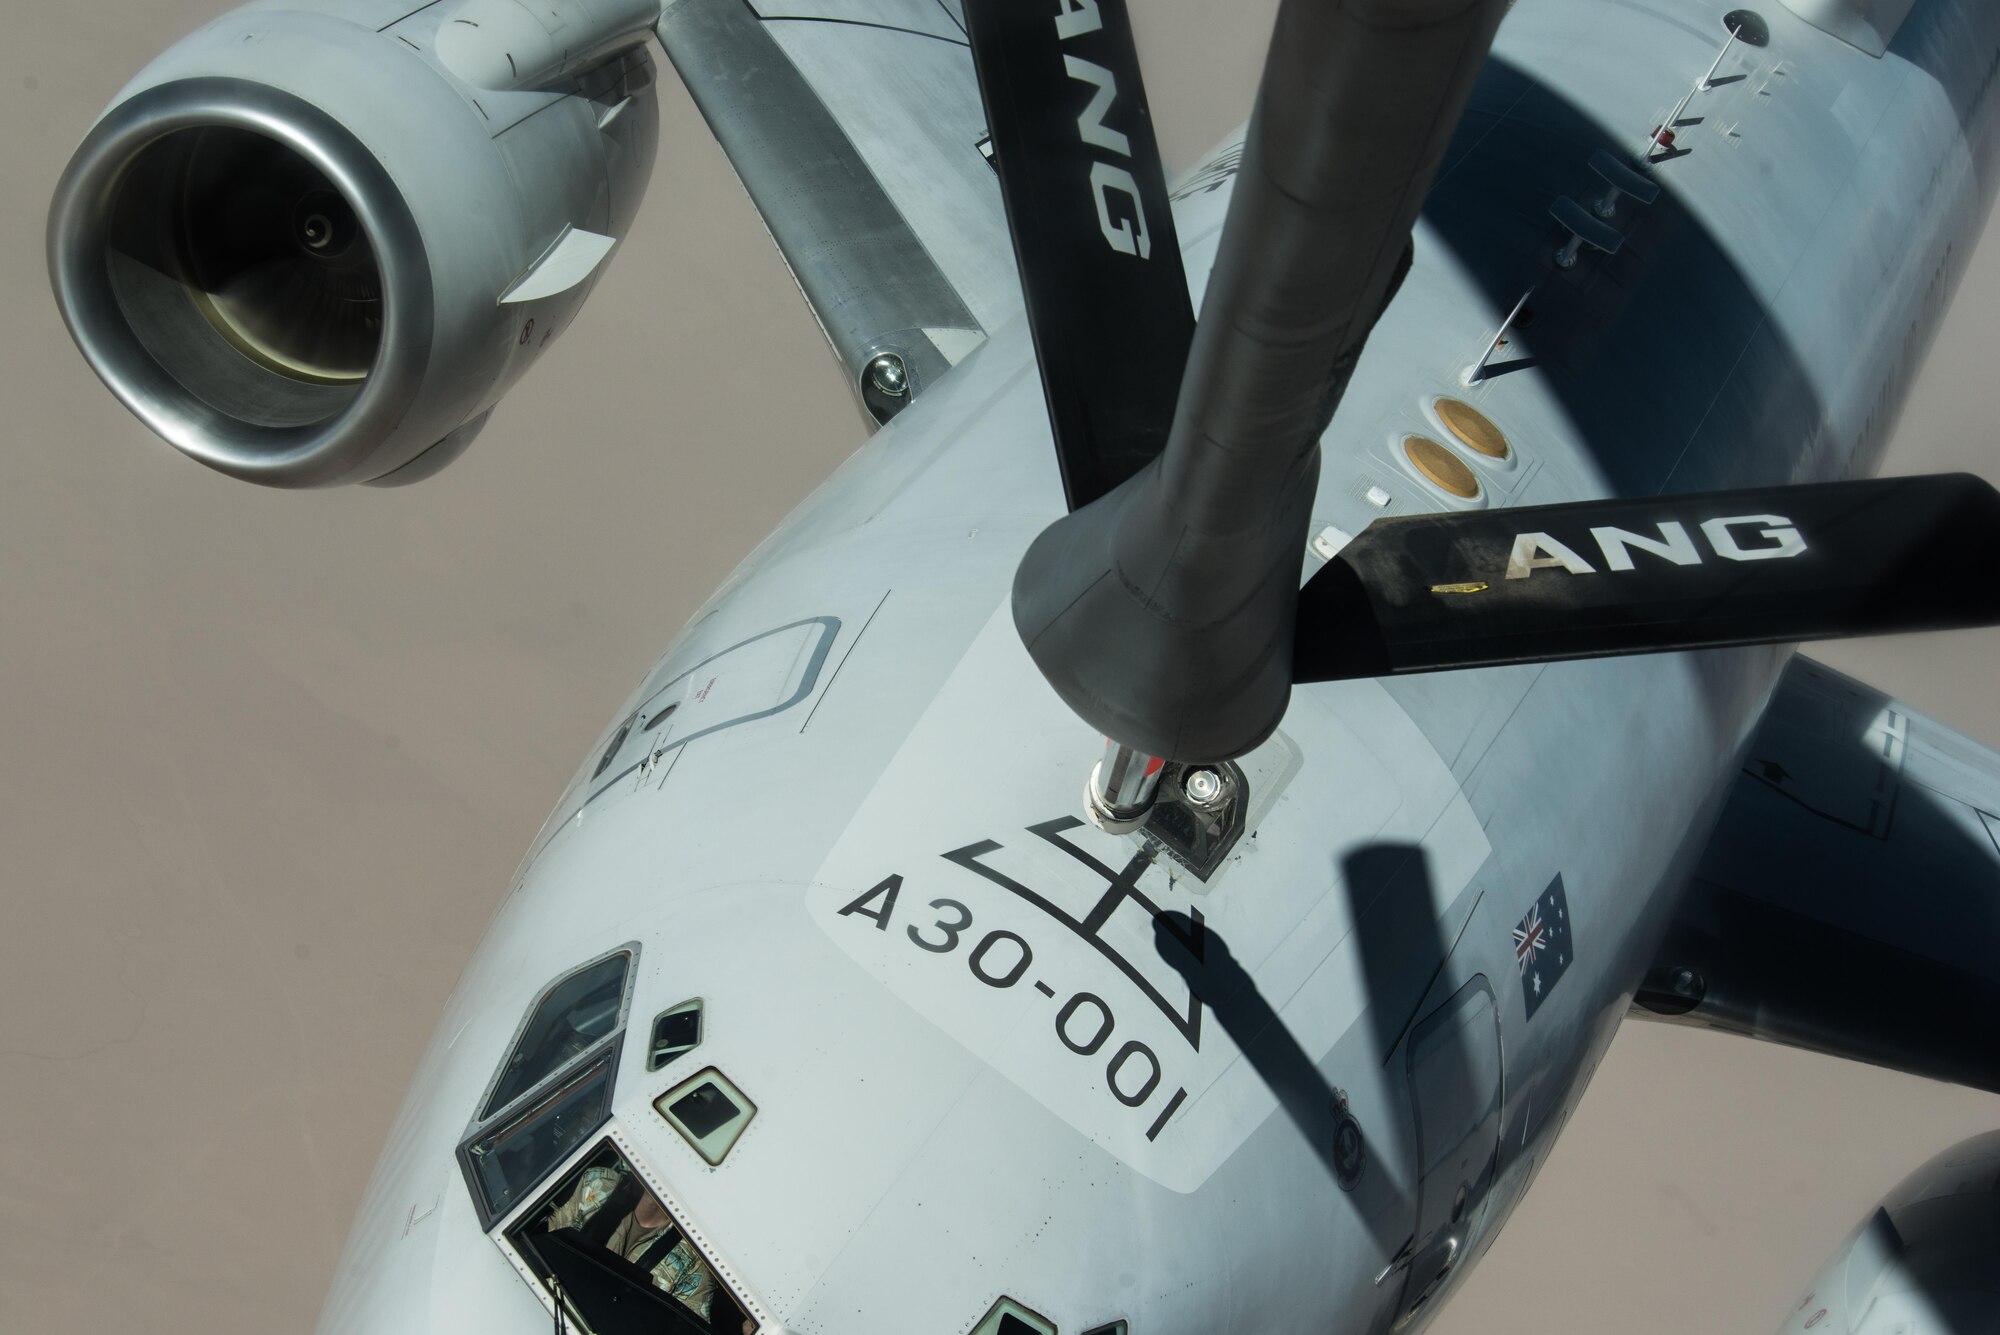 A Royal Australian Air Force E-7A Wedgetail receives fuels from an Air National Guard KC-135 Stratotanker over Iraq Sept. 16, 2015. The KC-135 was deployed to the 340th Expeditionary Air Refueling Squadron at Al Udeid Air Base, Qatar. The KC-135 fleet at Al Udeid AB flew more than 14,700 sorties in 2015 accumulating 103,419 combat hours in support of Operations Inherent Resolve and Freedom’s Sentinel. (U.S. Air Force photo/Staff Sgt. Alexandre Montes) 